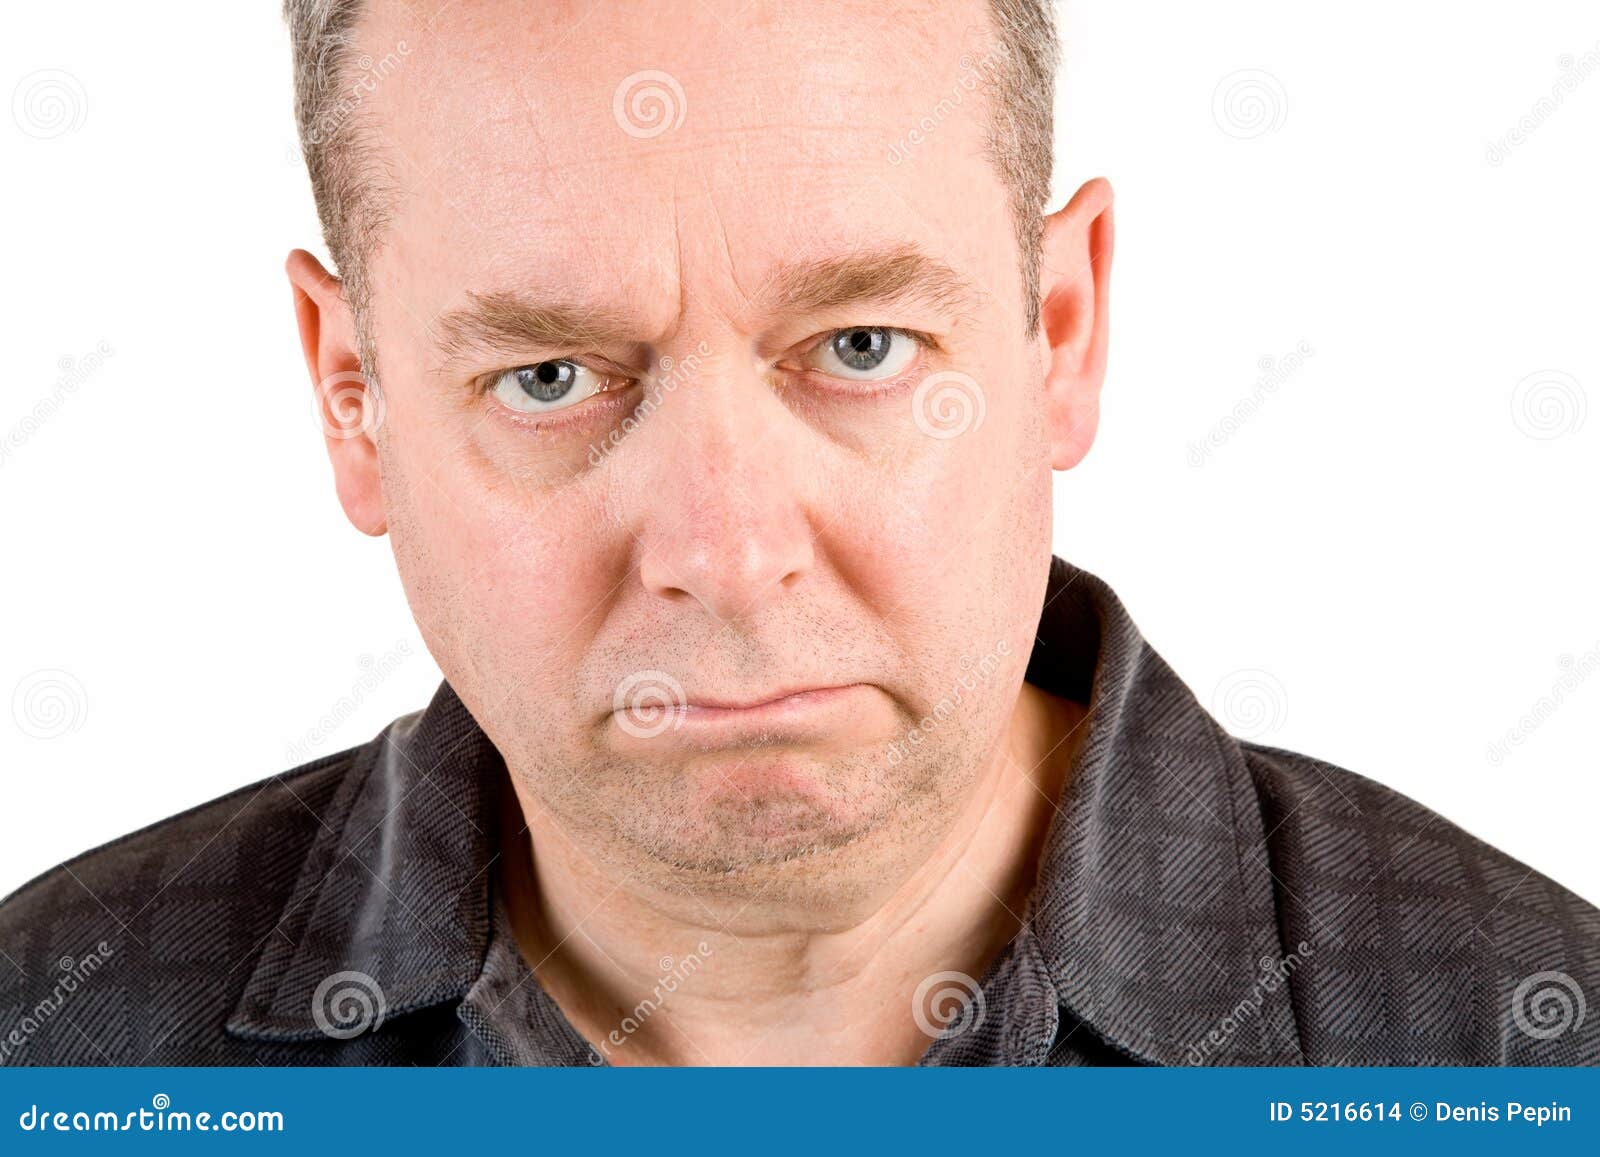 Very Serious Look stock photo. Image of cynical, eyes ...